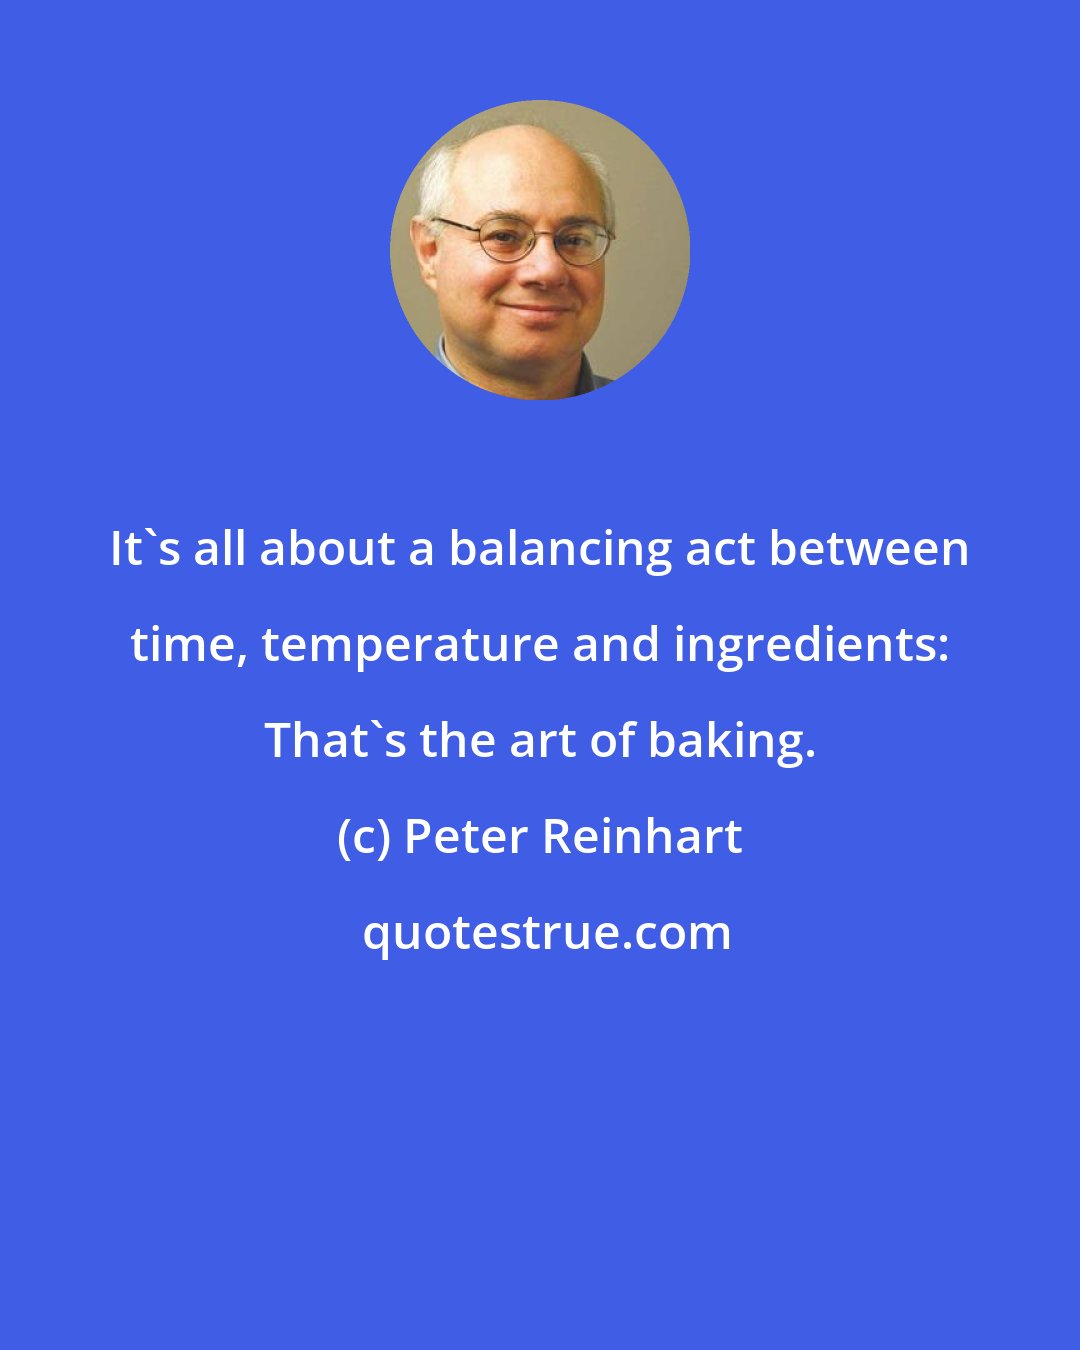 Peter Reinhart: It's all about a balancing act between time, temperature and ingredients: That's the art of baking.